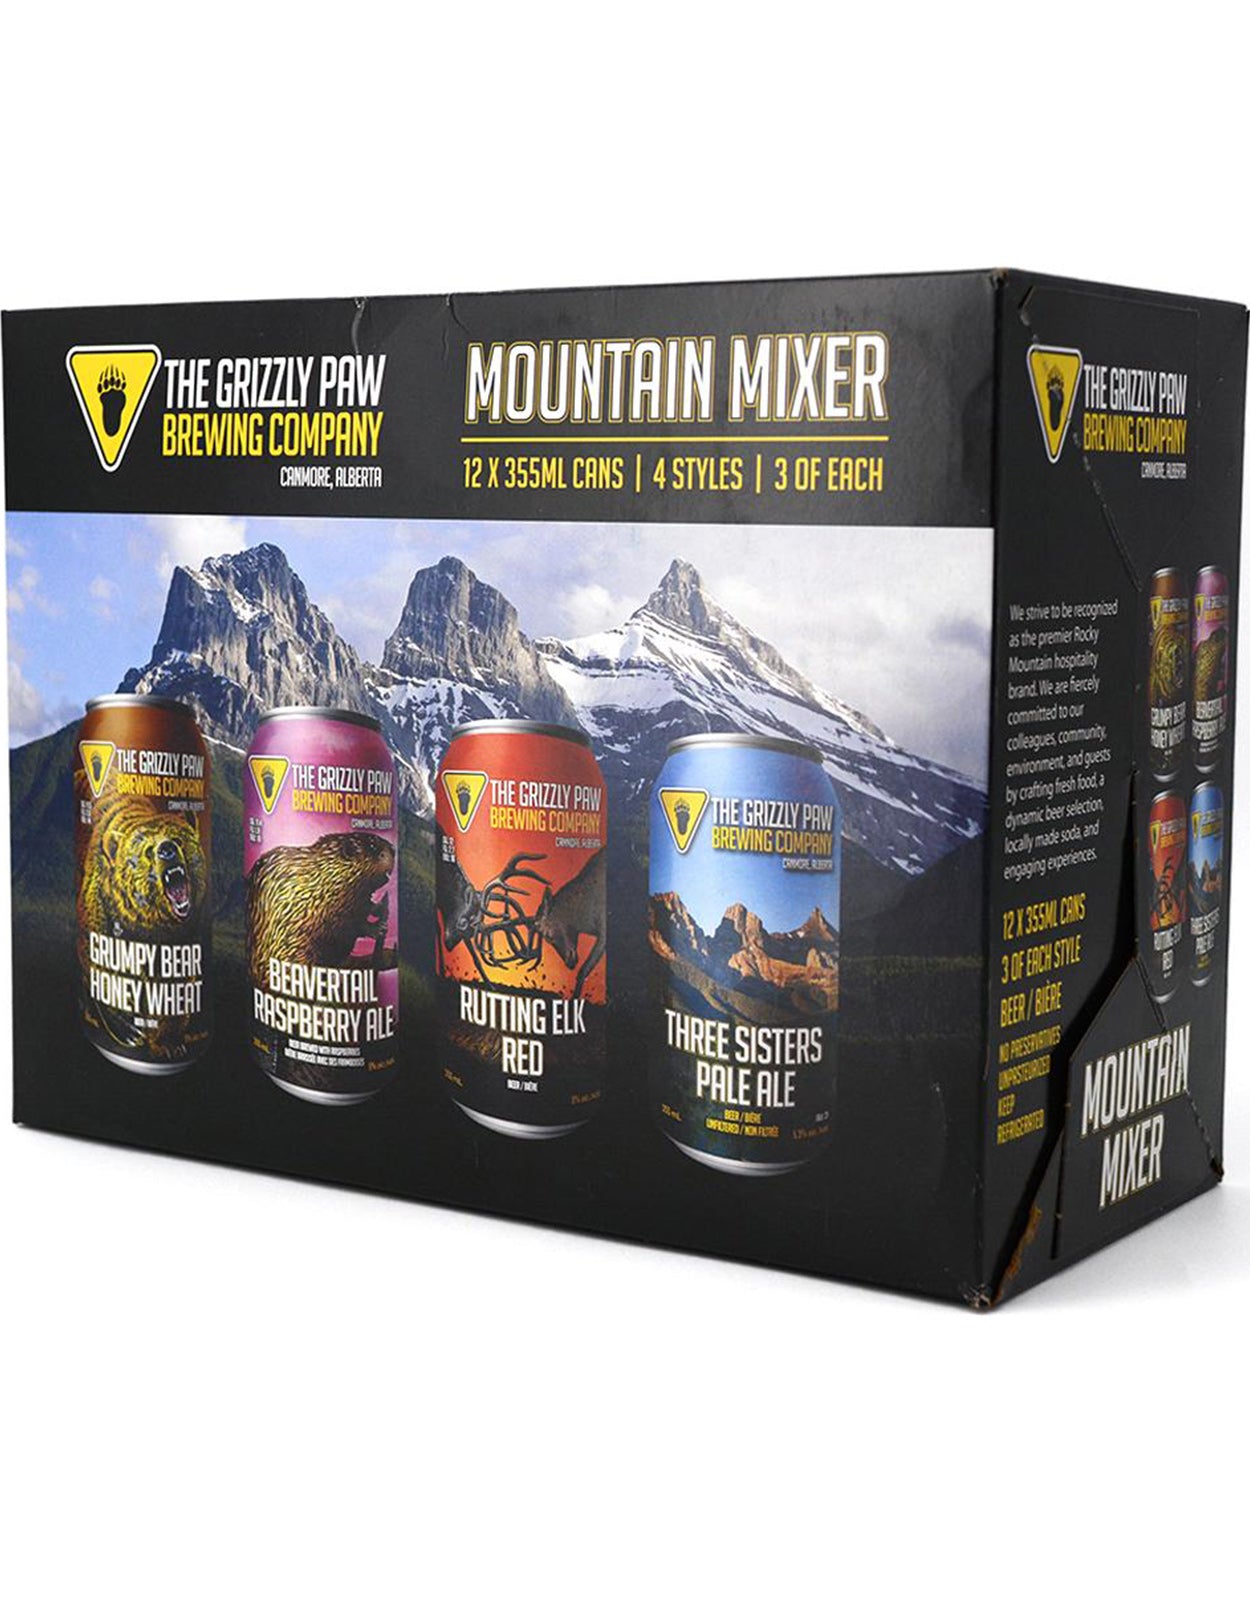 Grizzly Paw Mountain Mixer 355 ml - 12 Cans